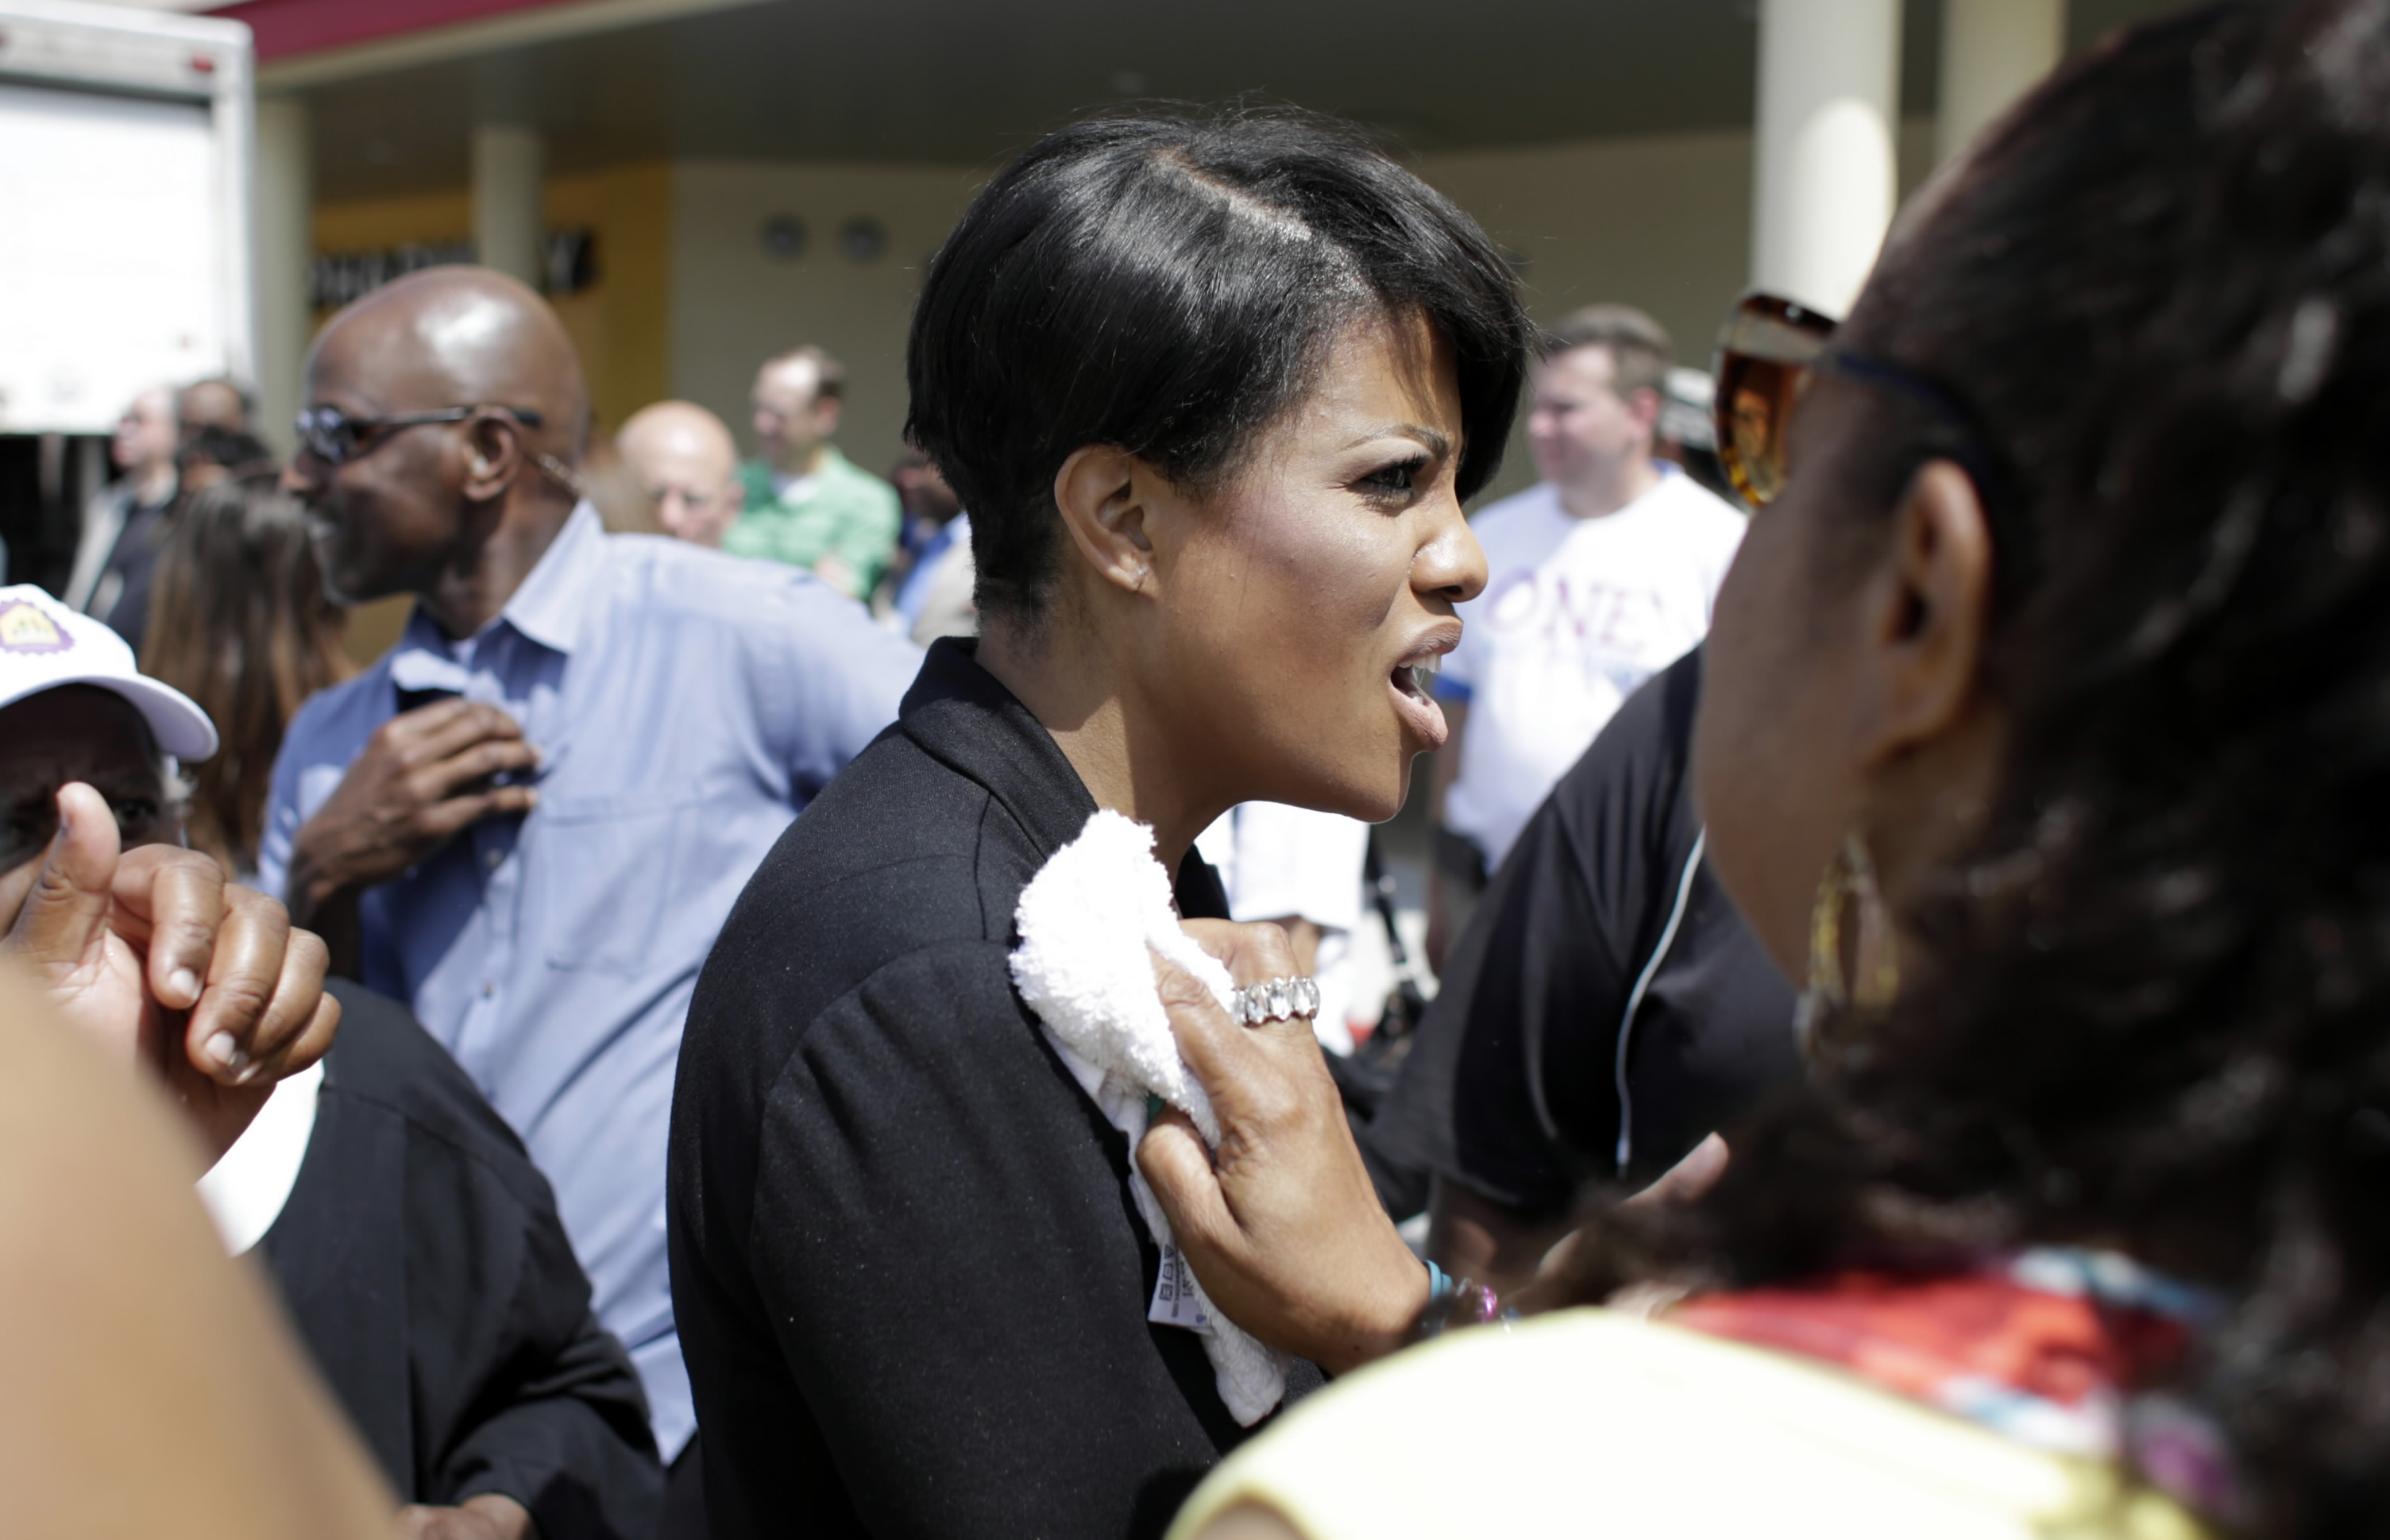 Baltimore, MD - 07/11/15 - Mayor Stephanie Rawlings-Blake has water dumped on her by a bystander after speaking at the Mondawmin mall Tom Brenner / The Baltimore Sun. 